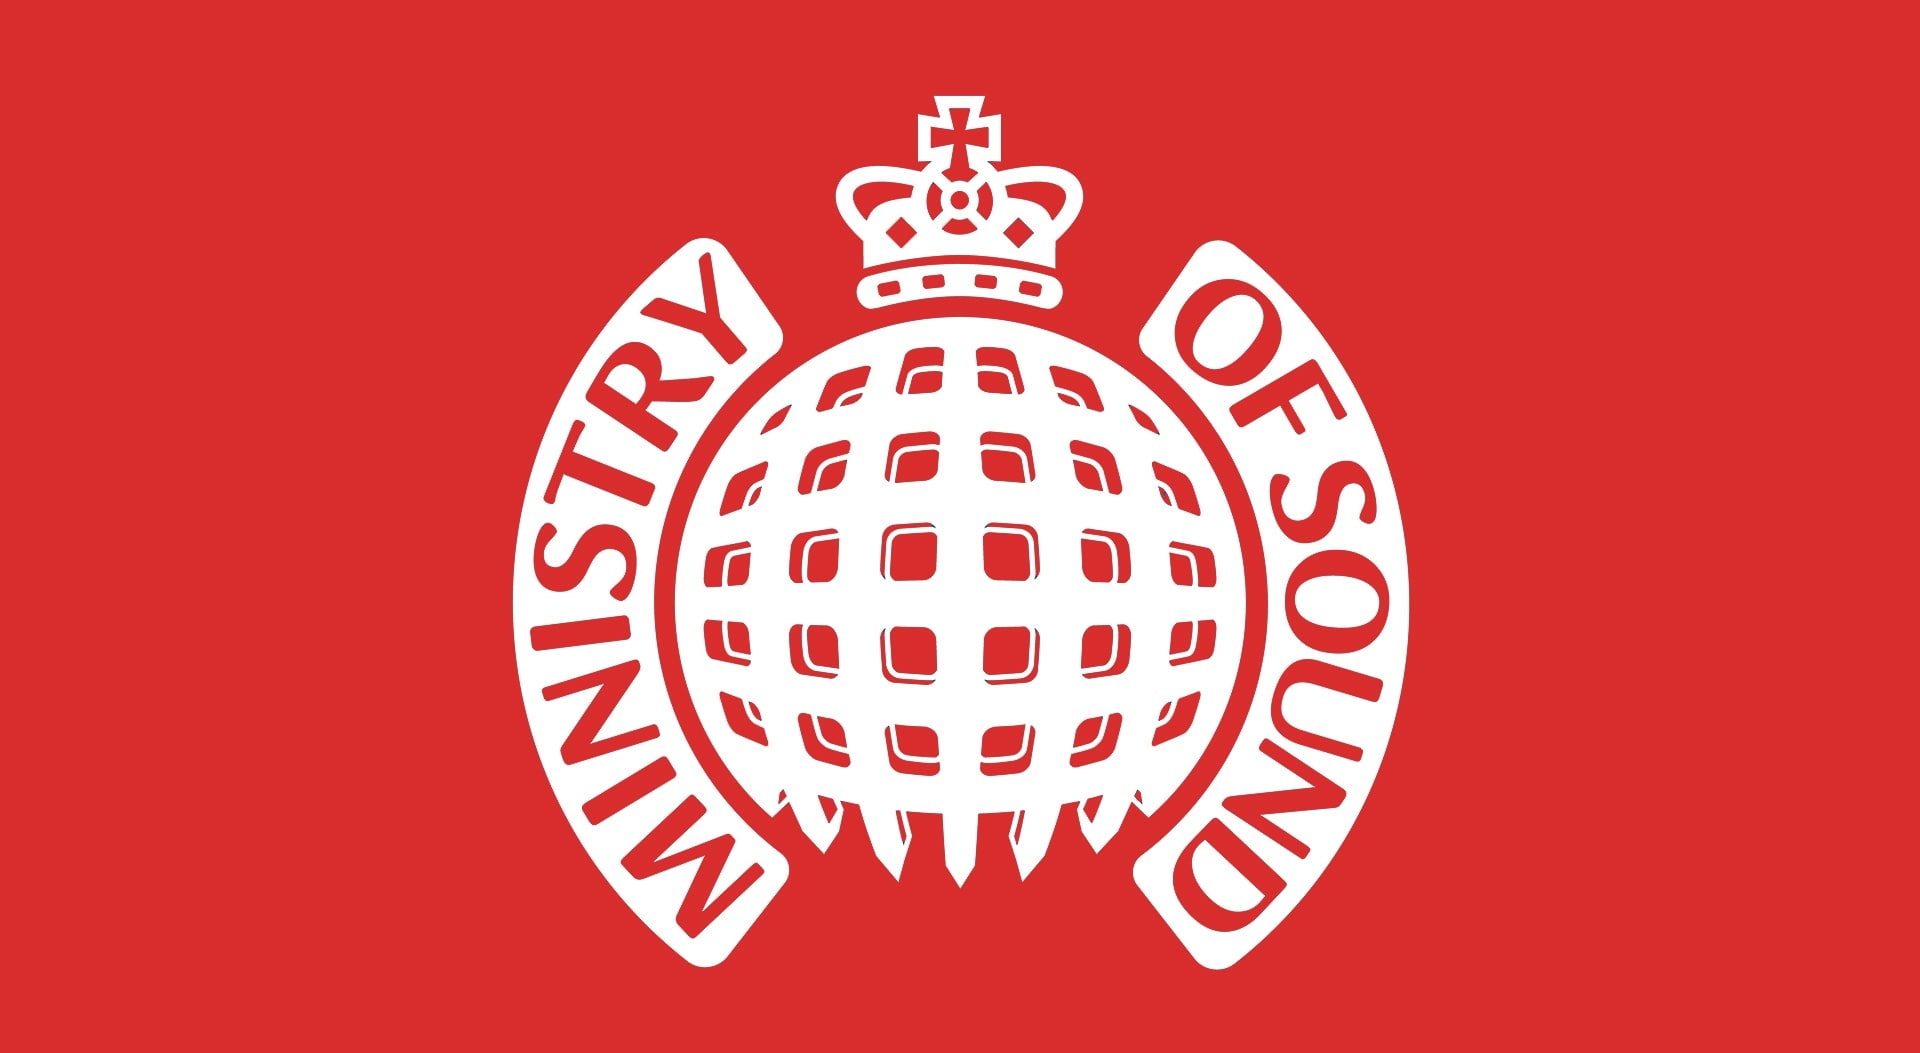 Ministry Of Sound, Ministry of Sound logo, Music, red, indoors